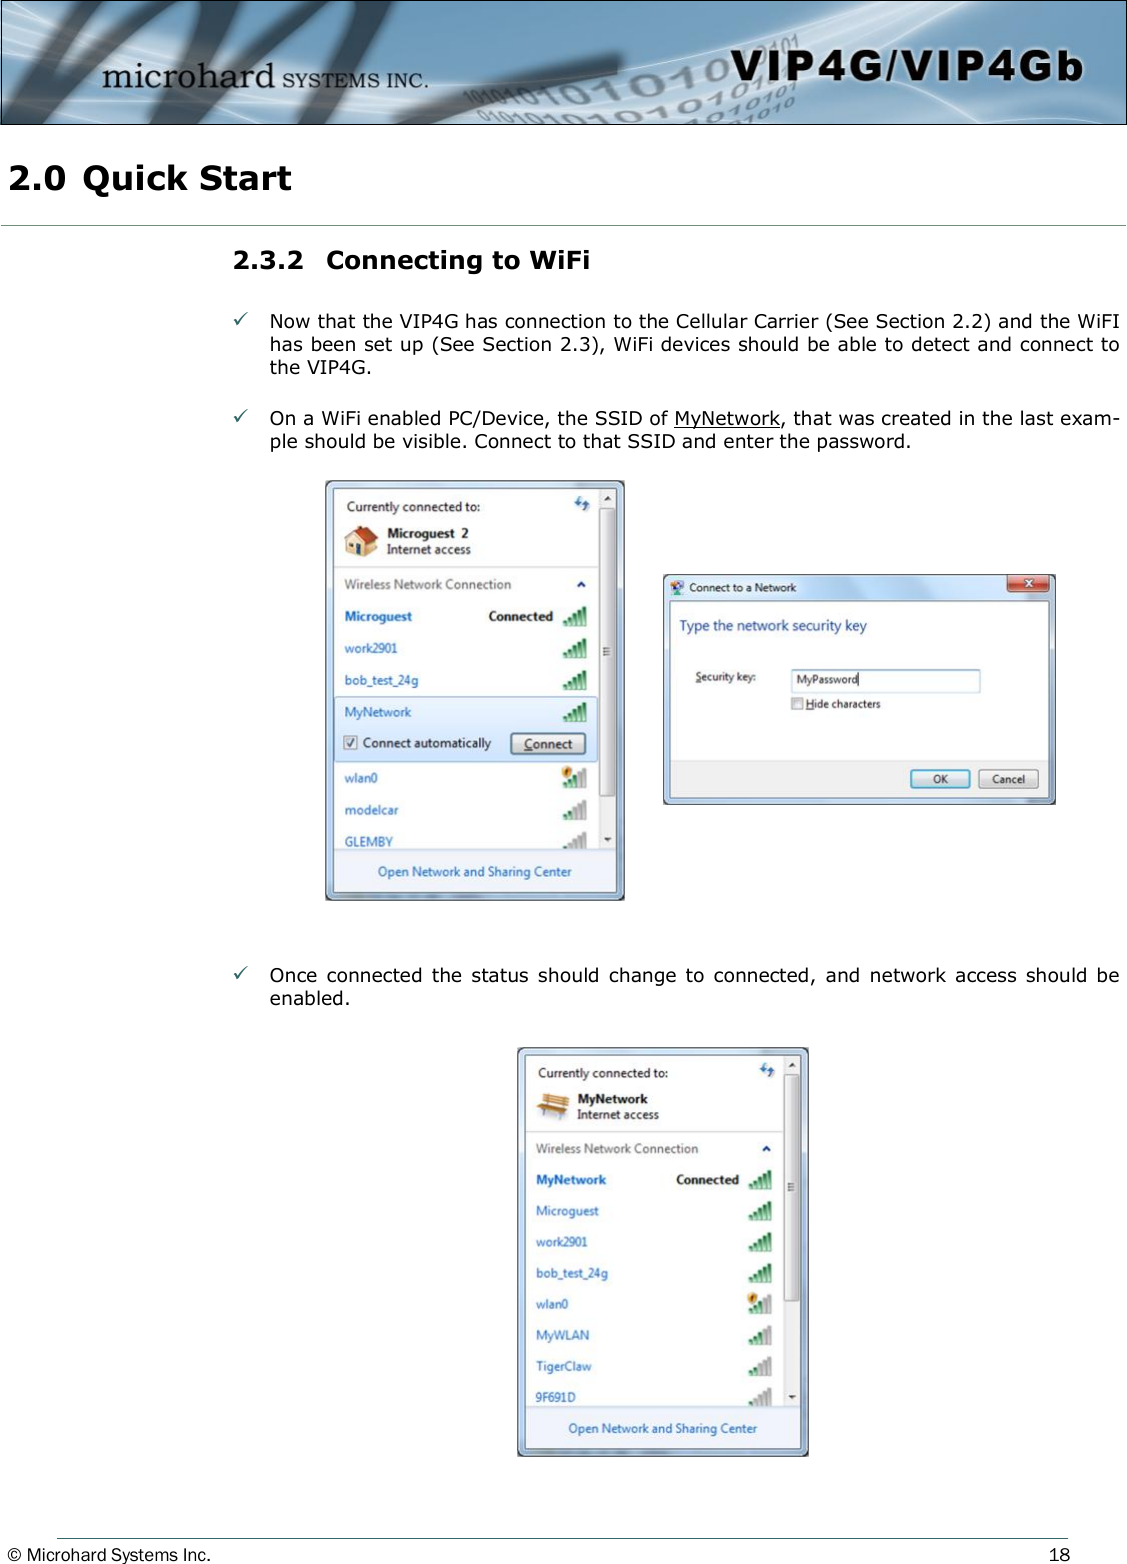 © Microhard Systems Inc.     18 2.3.2  Connecting to WiFi   Now that the VIP4G has connection to the Cellular Carrier (See Section 2.2) and the WiFI has been set up (See Section 2.3), WiFi devices should be able to detect and connect to the VIP4G.   On a WiFi enabled PC/Device, the SSID of MyNetwork, that was created in the last exam-ple should be visible. Connect to that SSID and enter the password.                     Once connected the status should  change to  connected,  and  network access should be enabled.         2.0 Quick Start  